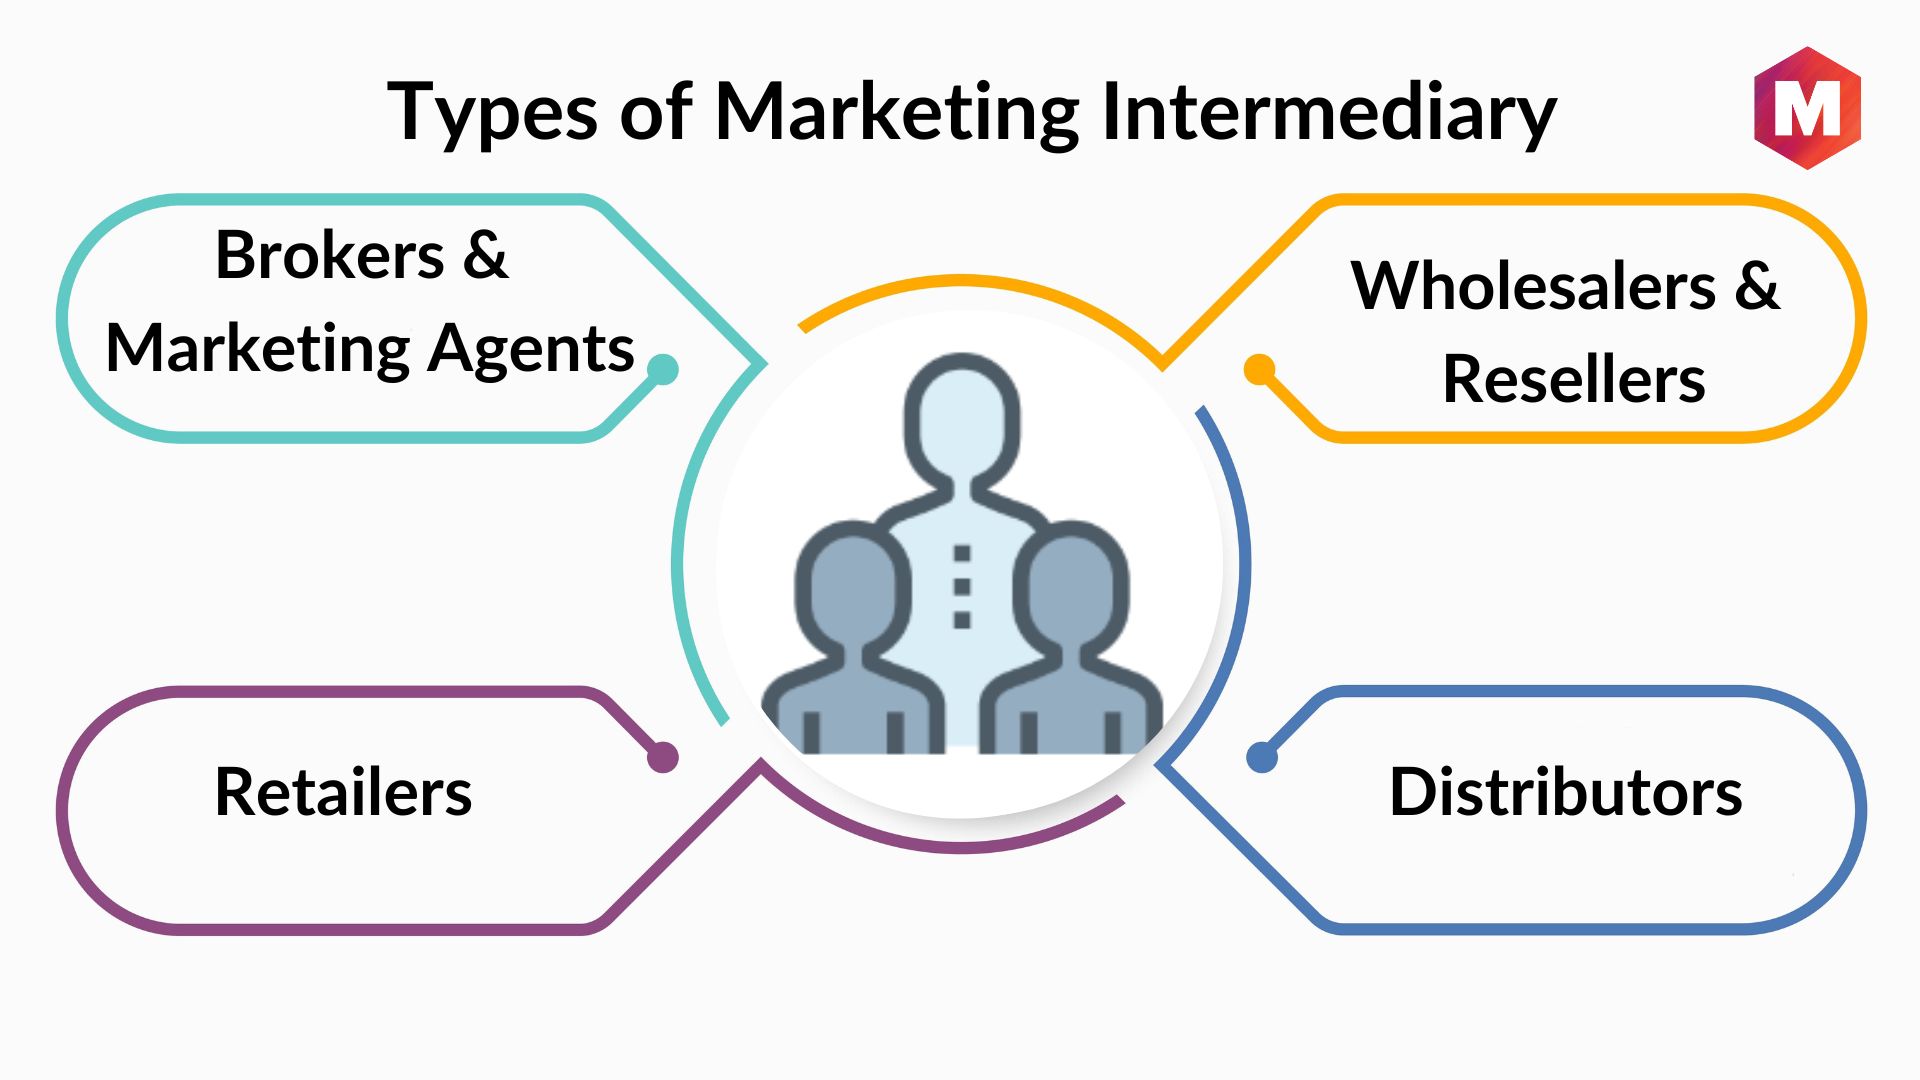 travel agents are market intermediaries gmat